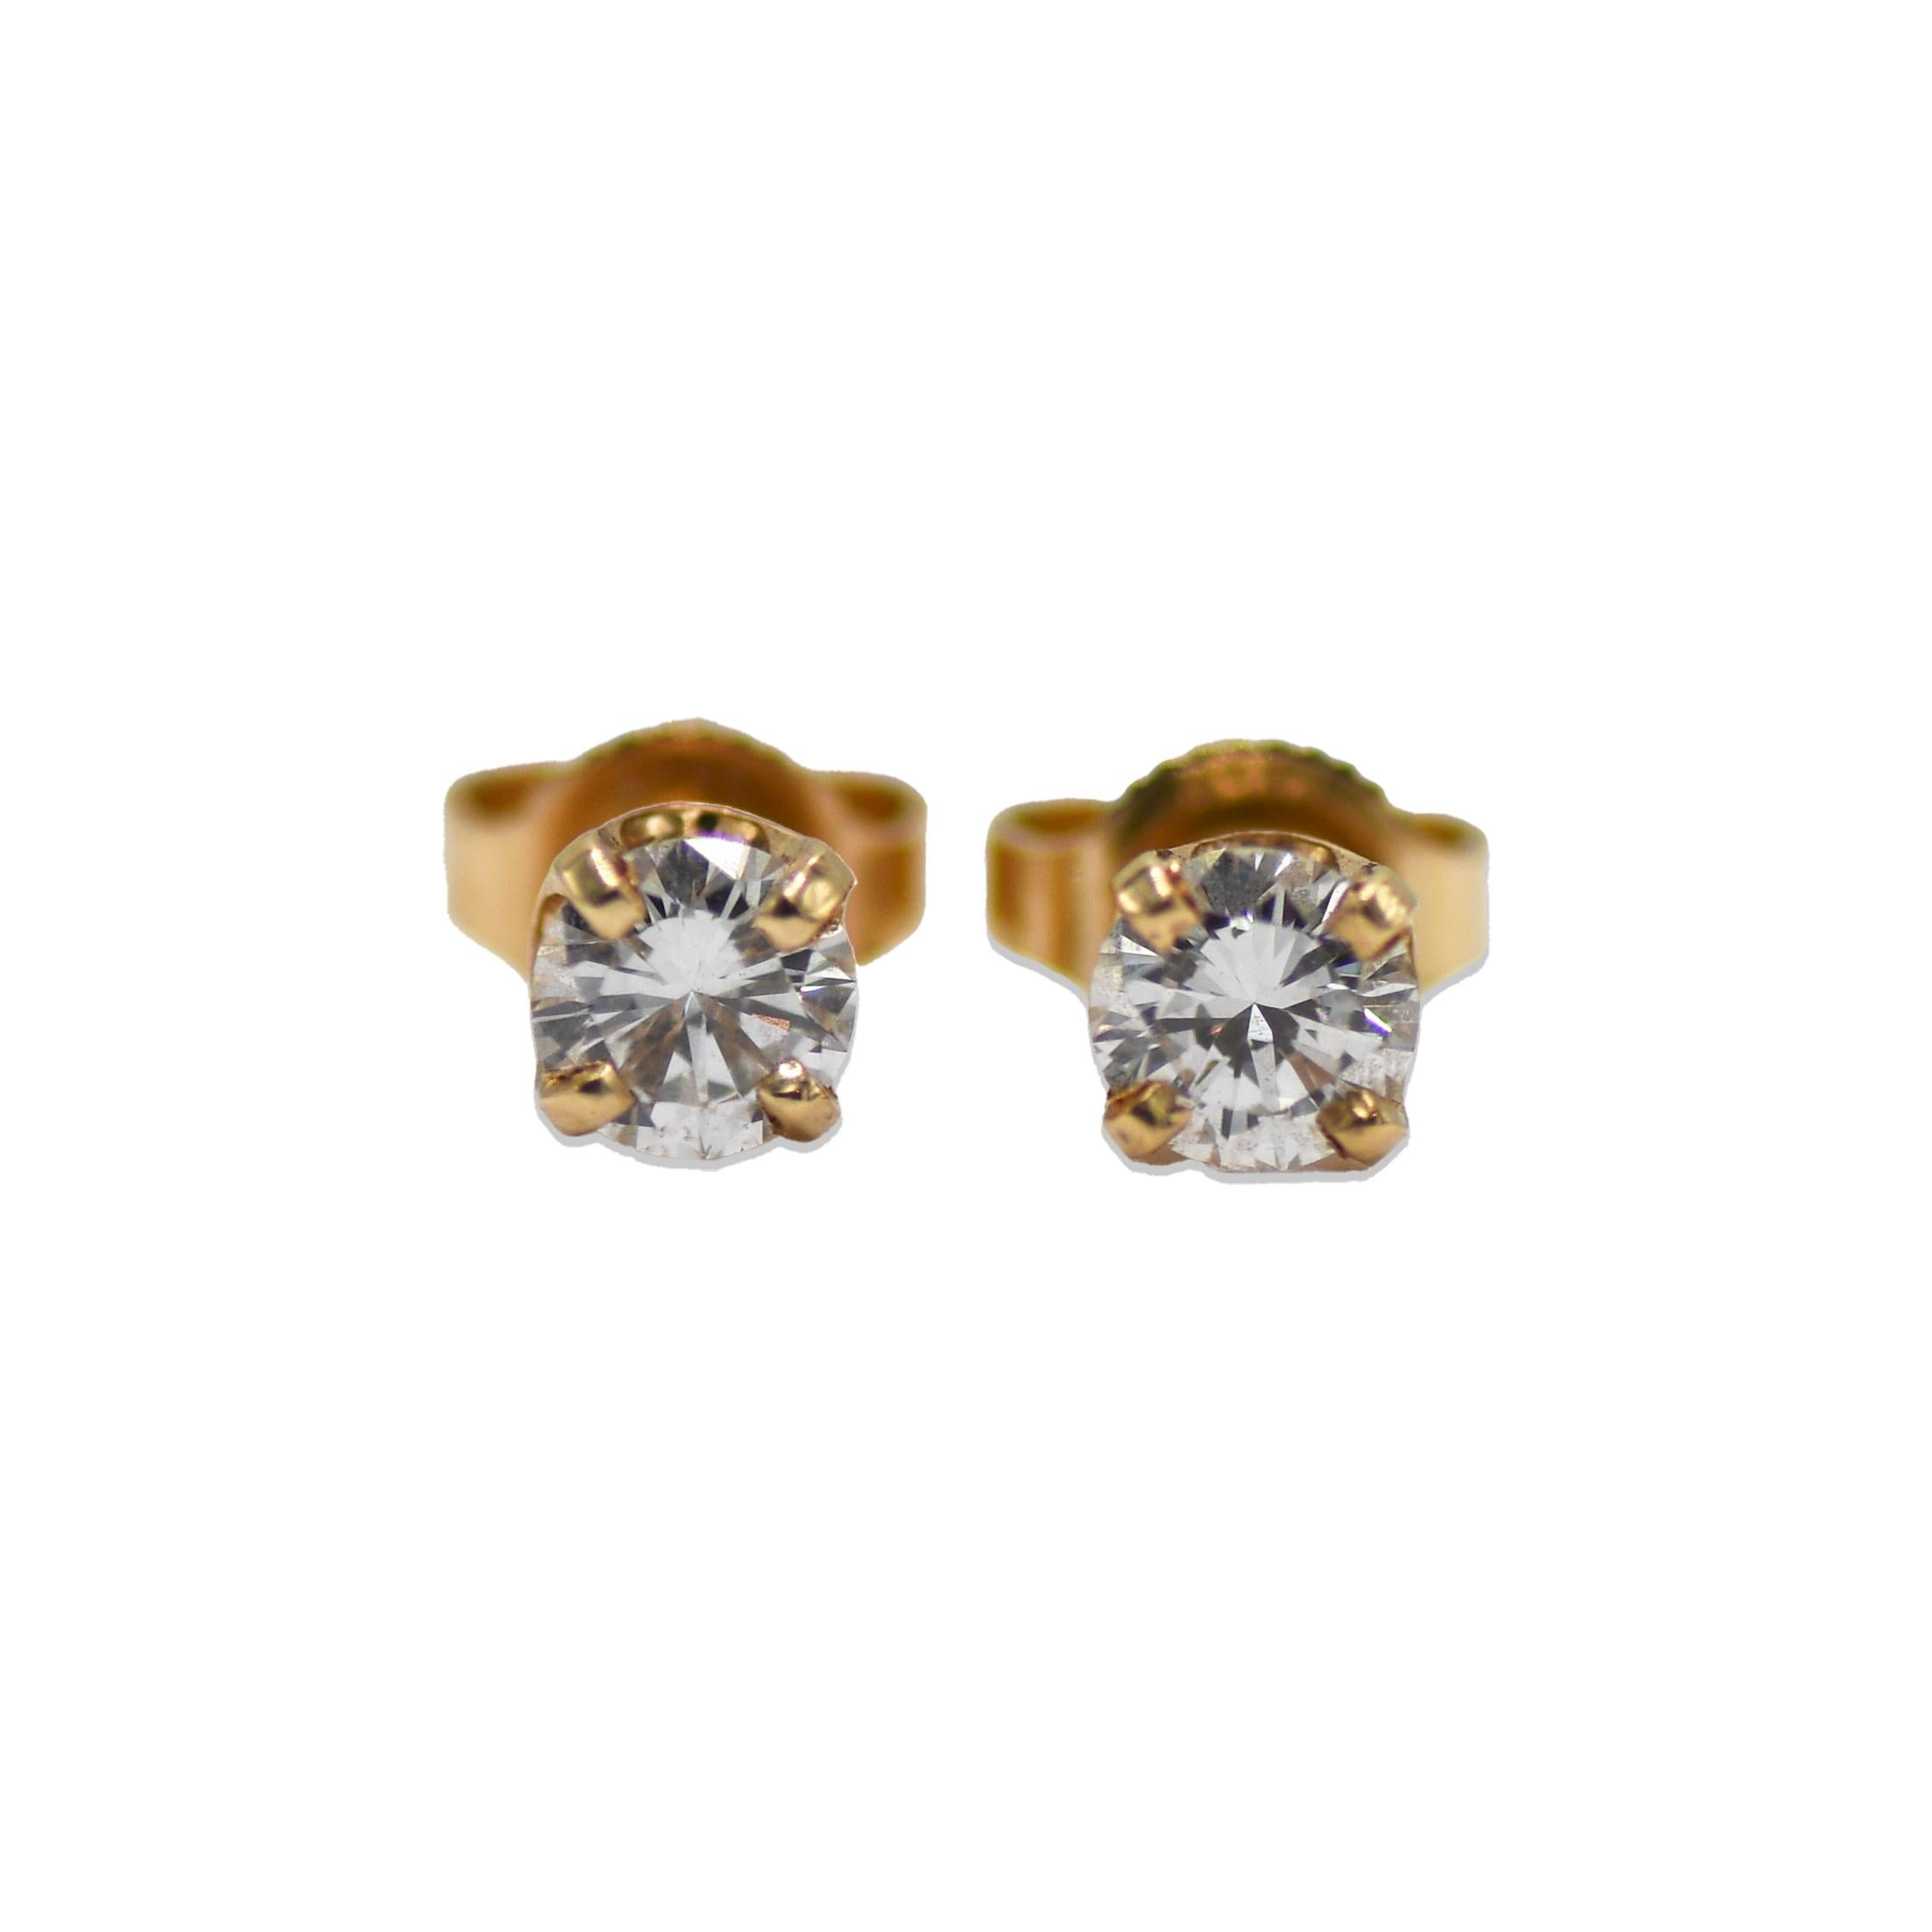 14K Yellow Gold Diamond Stud Earrings.

Elevate your elegance with these exquisite 14k yellow gold diamond stud earrings, the epitome of timeless sophistication. Each earring boasts a meticulously selected, round brilliant diamond, radiating with